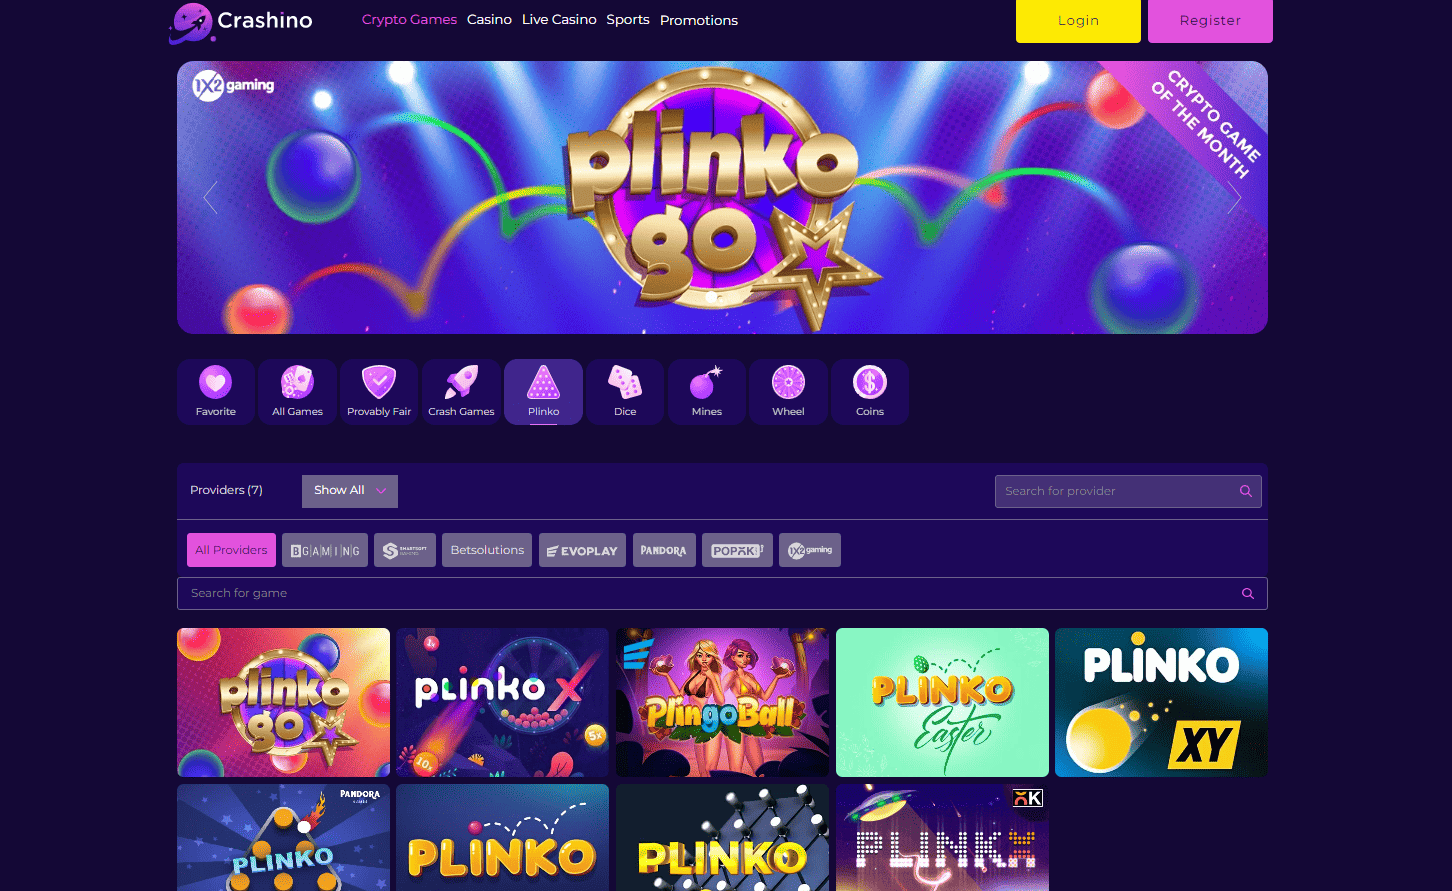 Getting Started with Plinko Gambling